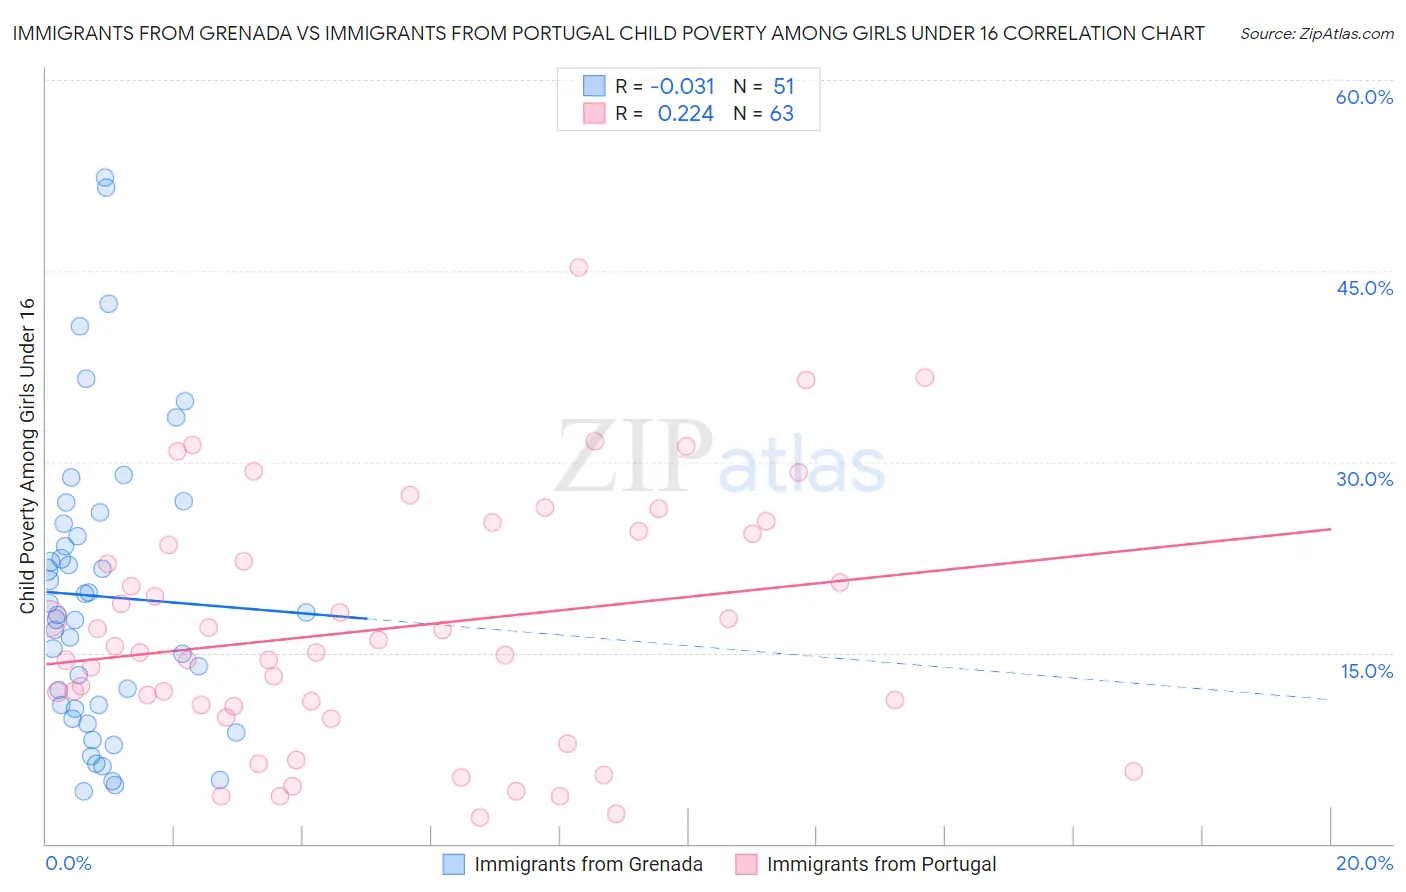 Immigrants from Grenada vs Immigrants from Portugal Child Poverty Among Girls Under 16